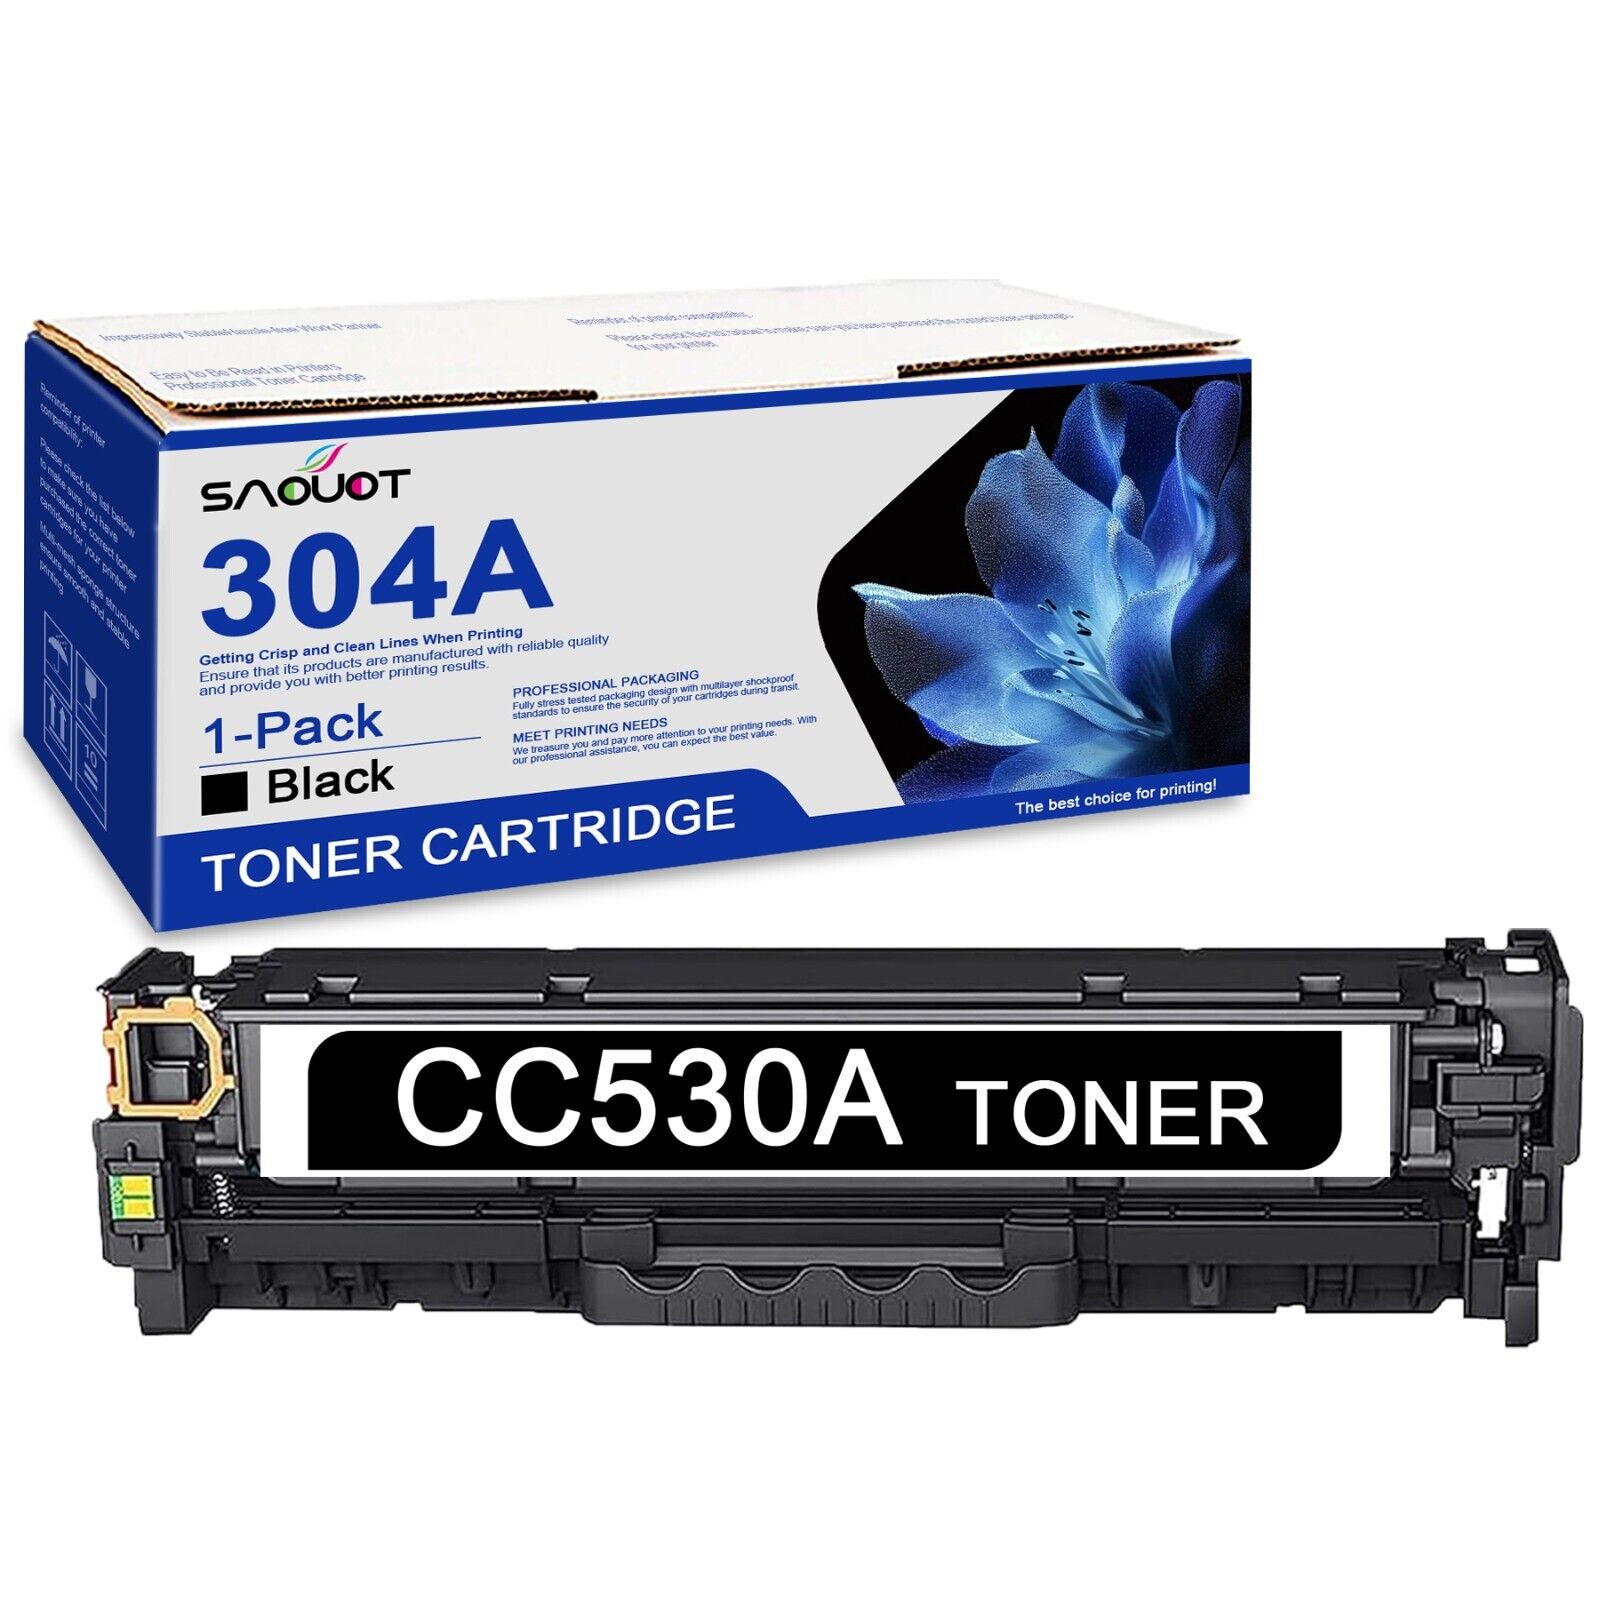 304A Toner Cartridges Replacement for HP Color CP2025 CM2320fxi MFP CP2025n